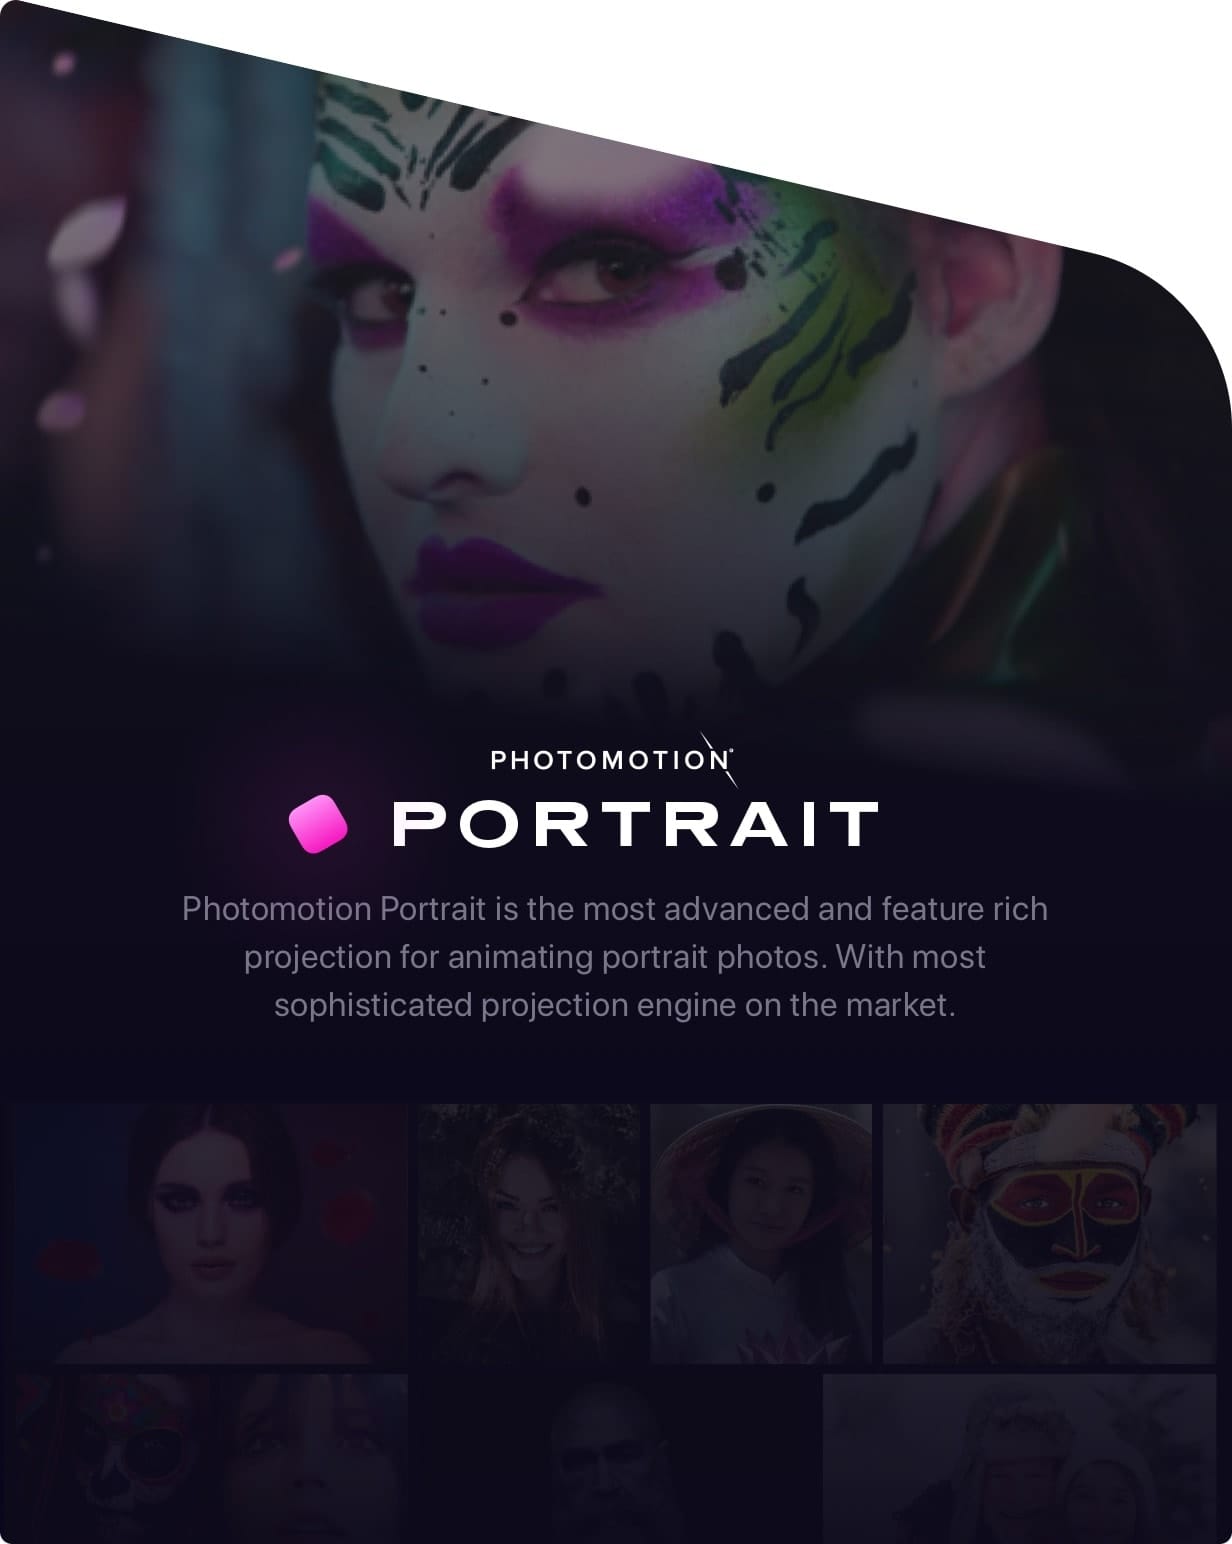 Portrait - Photomotion Portrait is the most advanced and feature rich projection for animating portrait photos. With most sophisticated projection engine on the market.